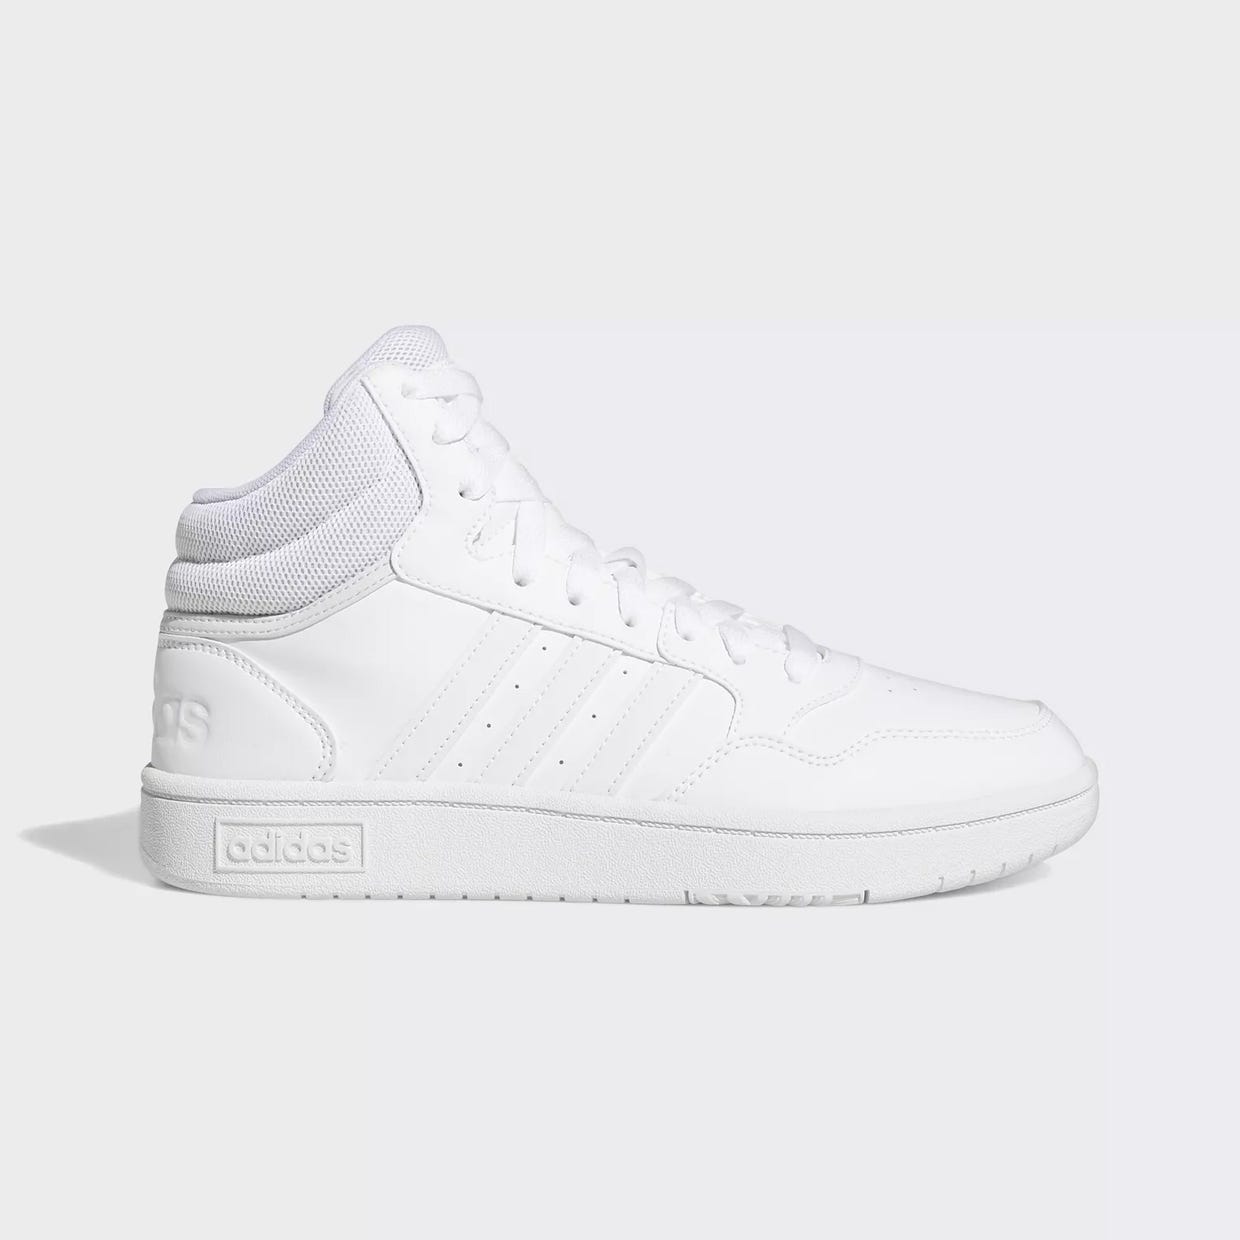 White high-top sneaker with laces and perforated detailing on a white sole.